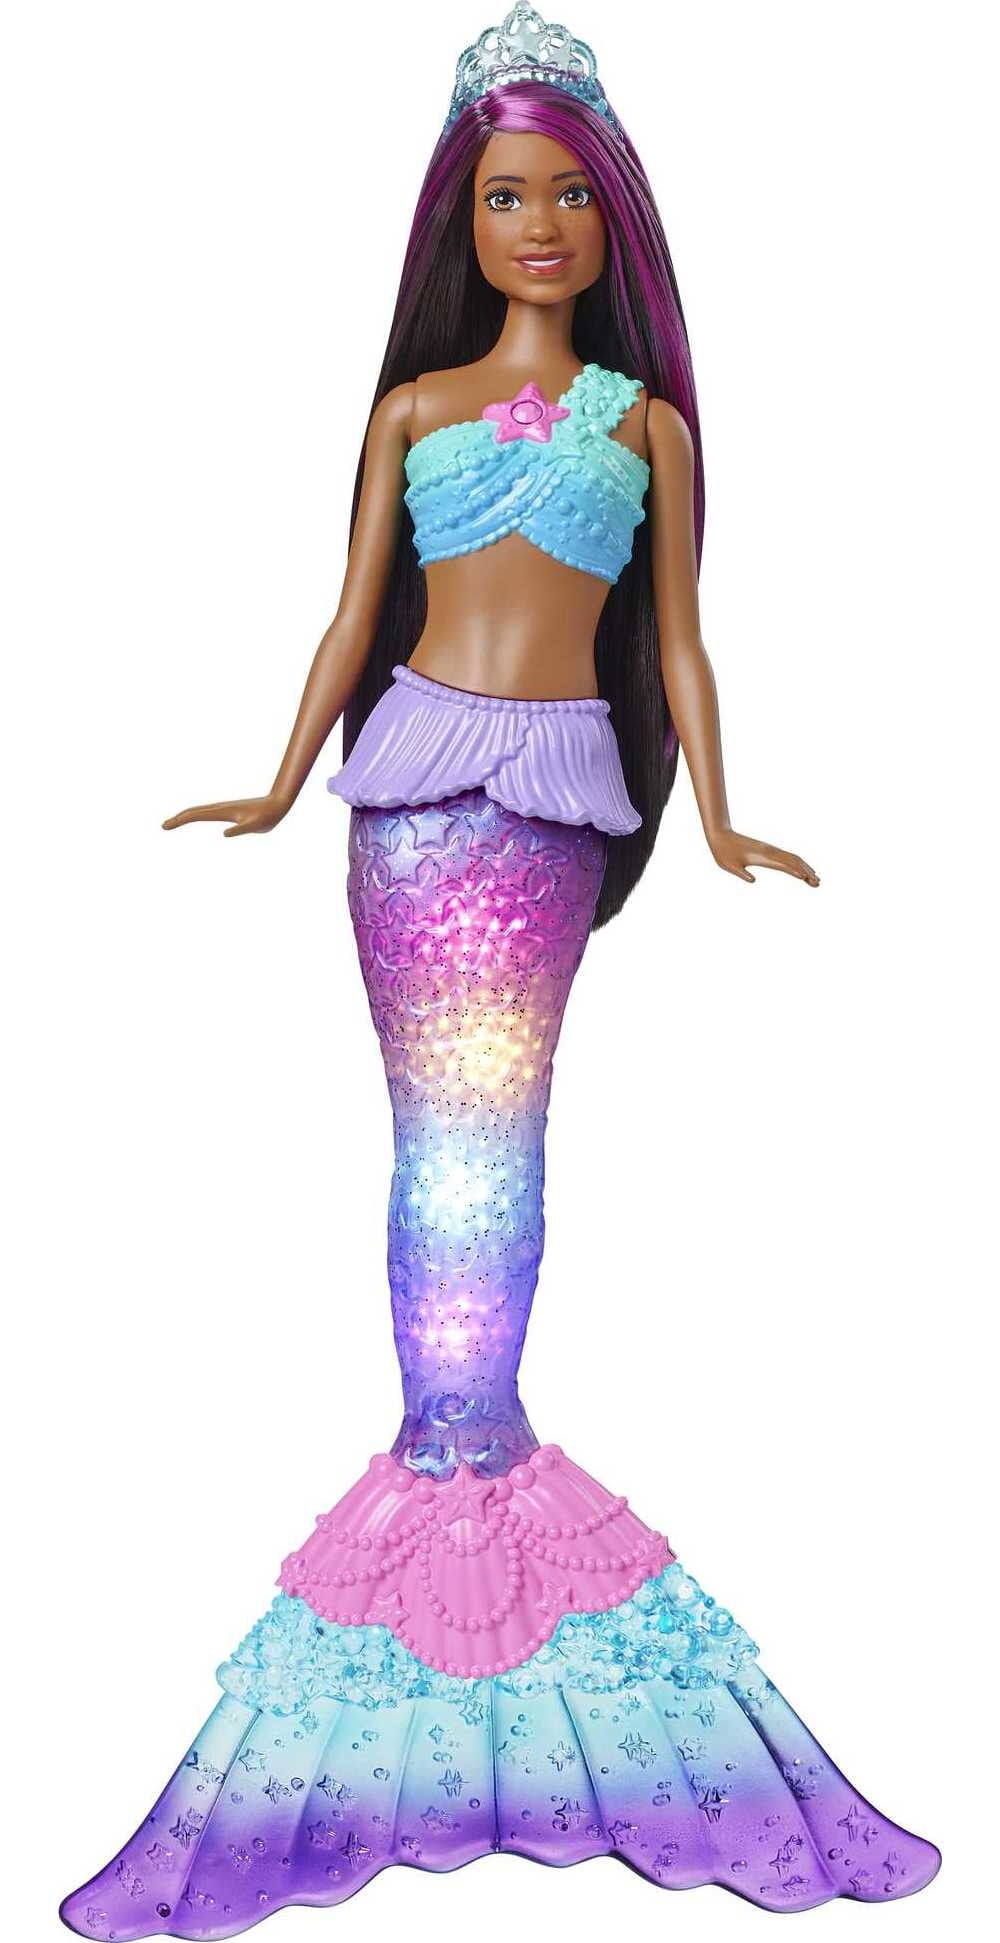 Barbie Dreamtopia Mermaid Doll with Twinkle Light-Up Tail and Purple-Streaked Hair